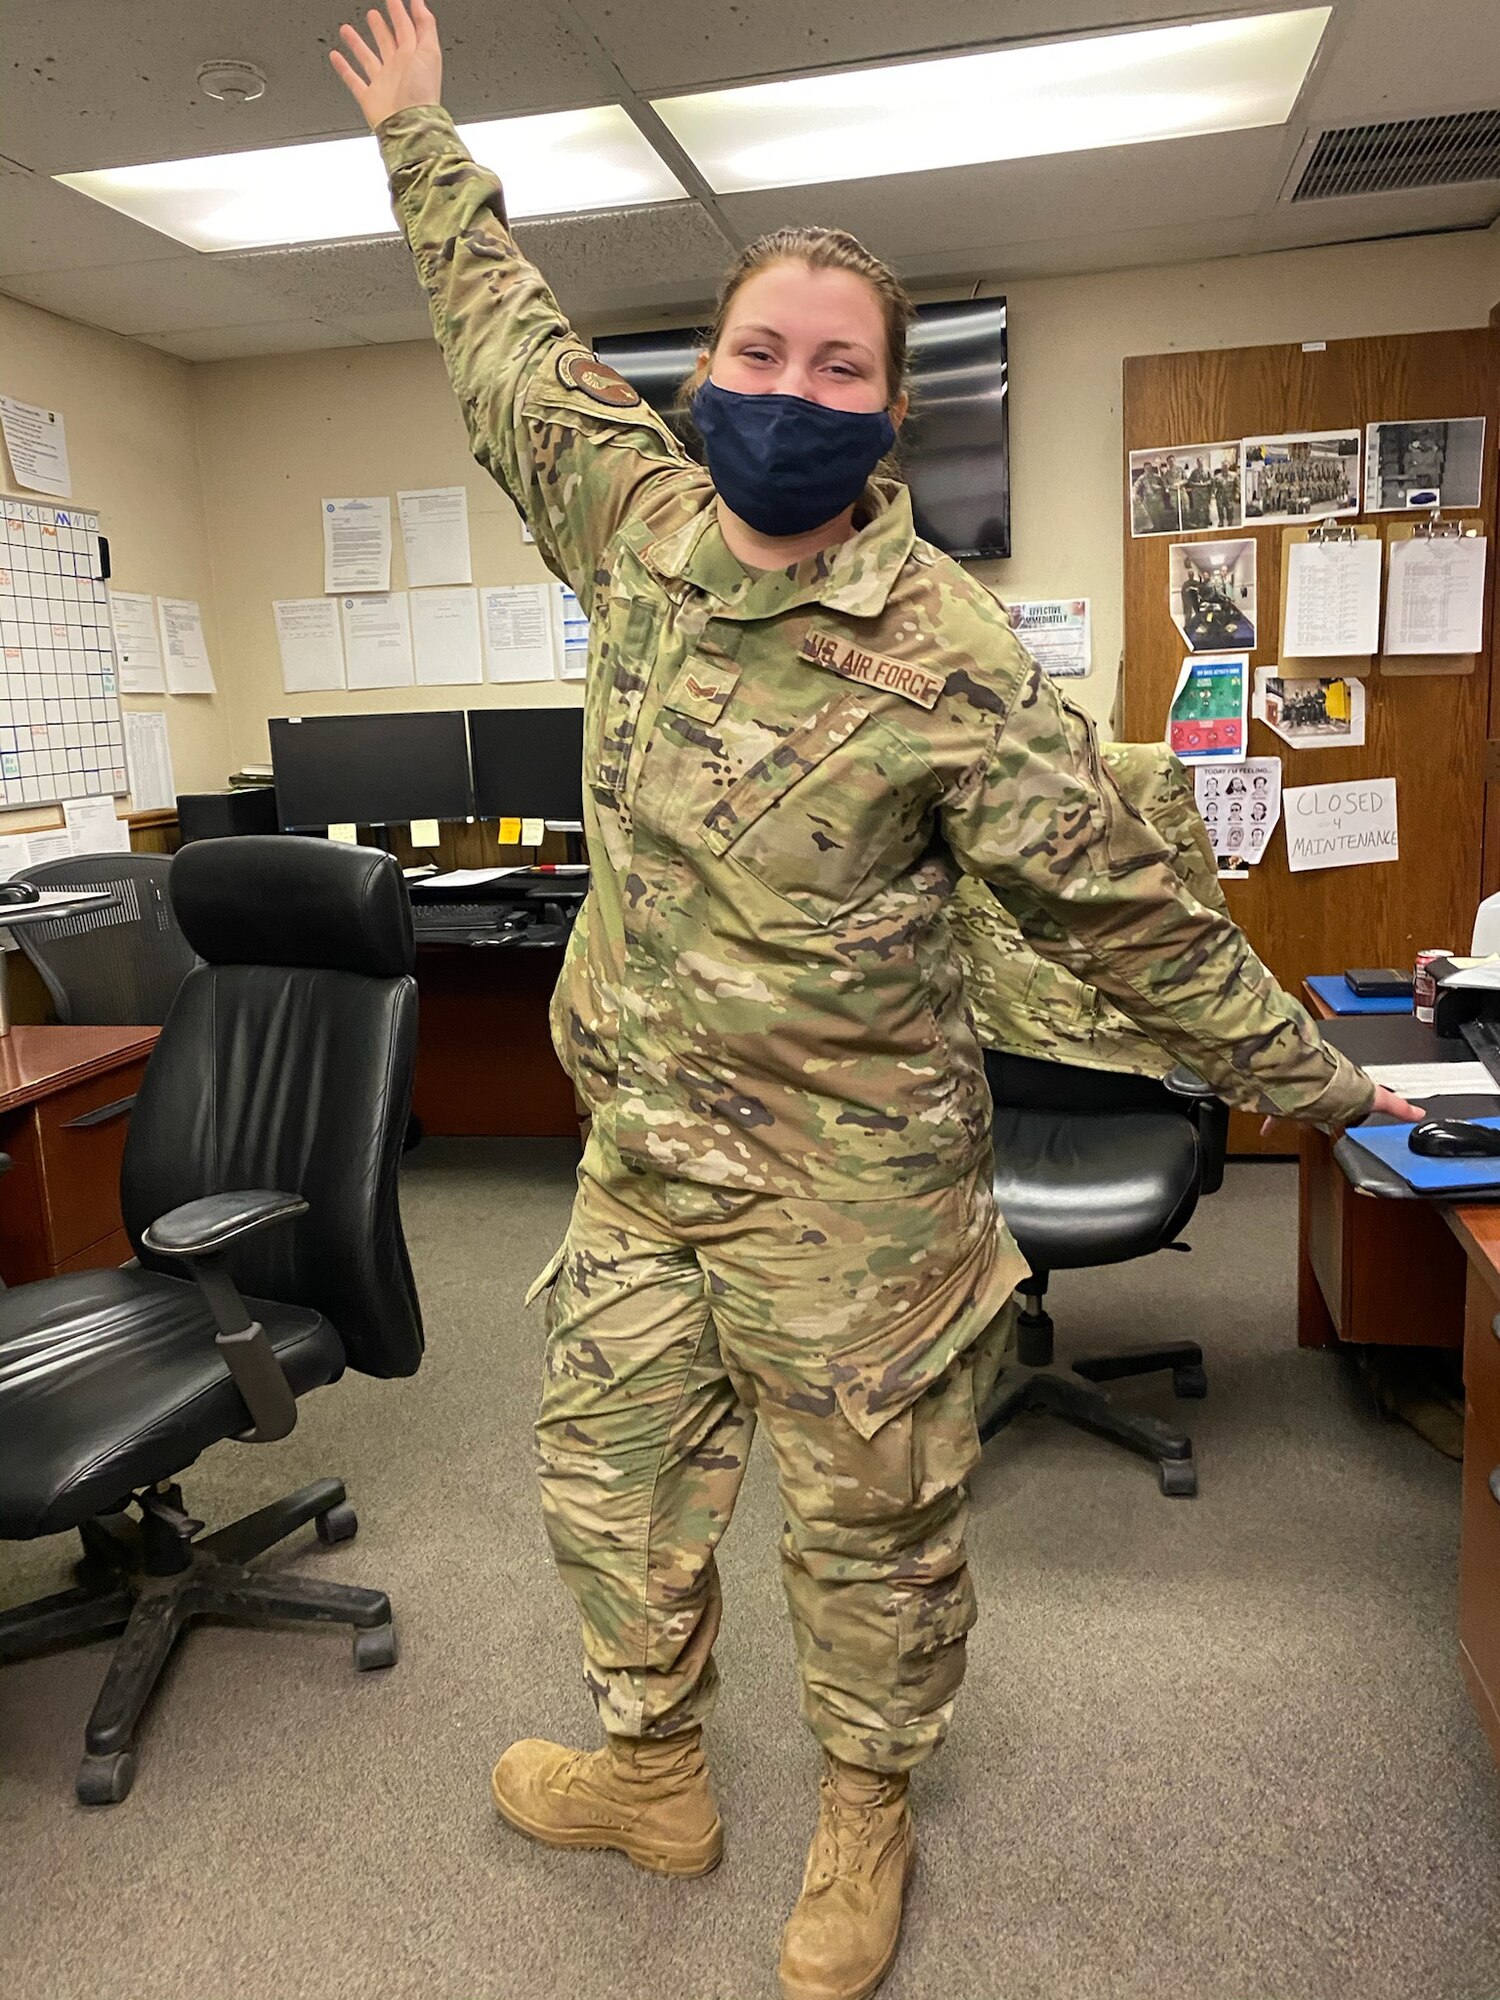 SrA Madison Kennon is a Team Chief of an Electro-Mechanical Team (EMT) at Minot Air Force Base, North Dakota March 22, 2021.